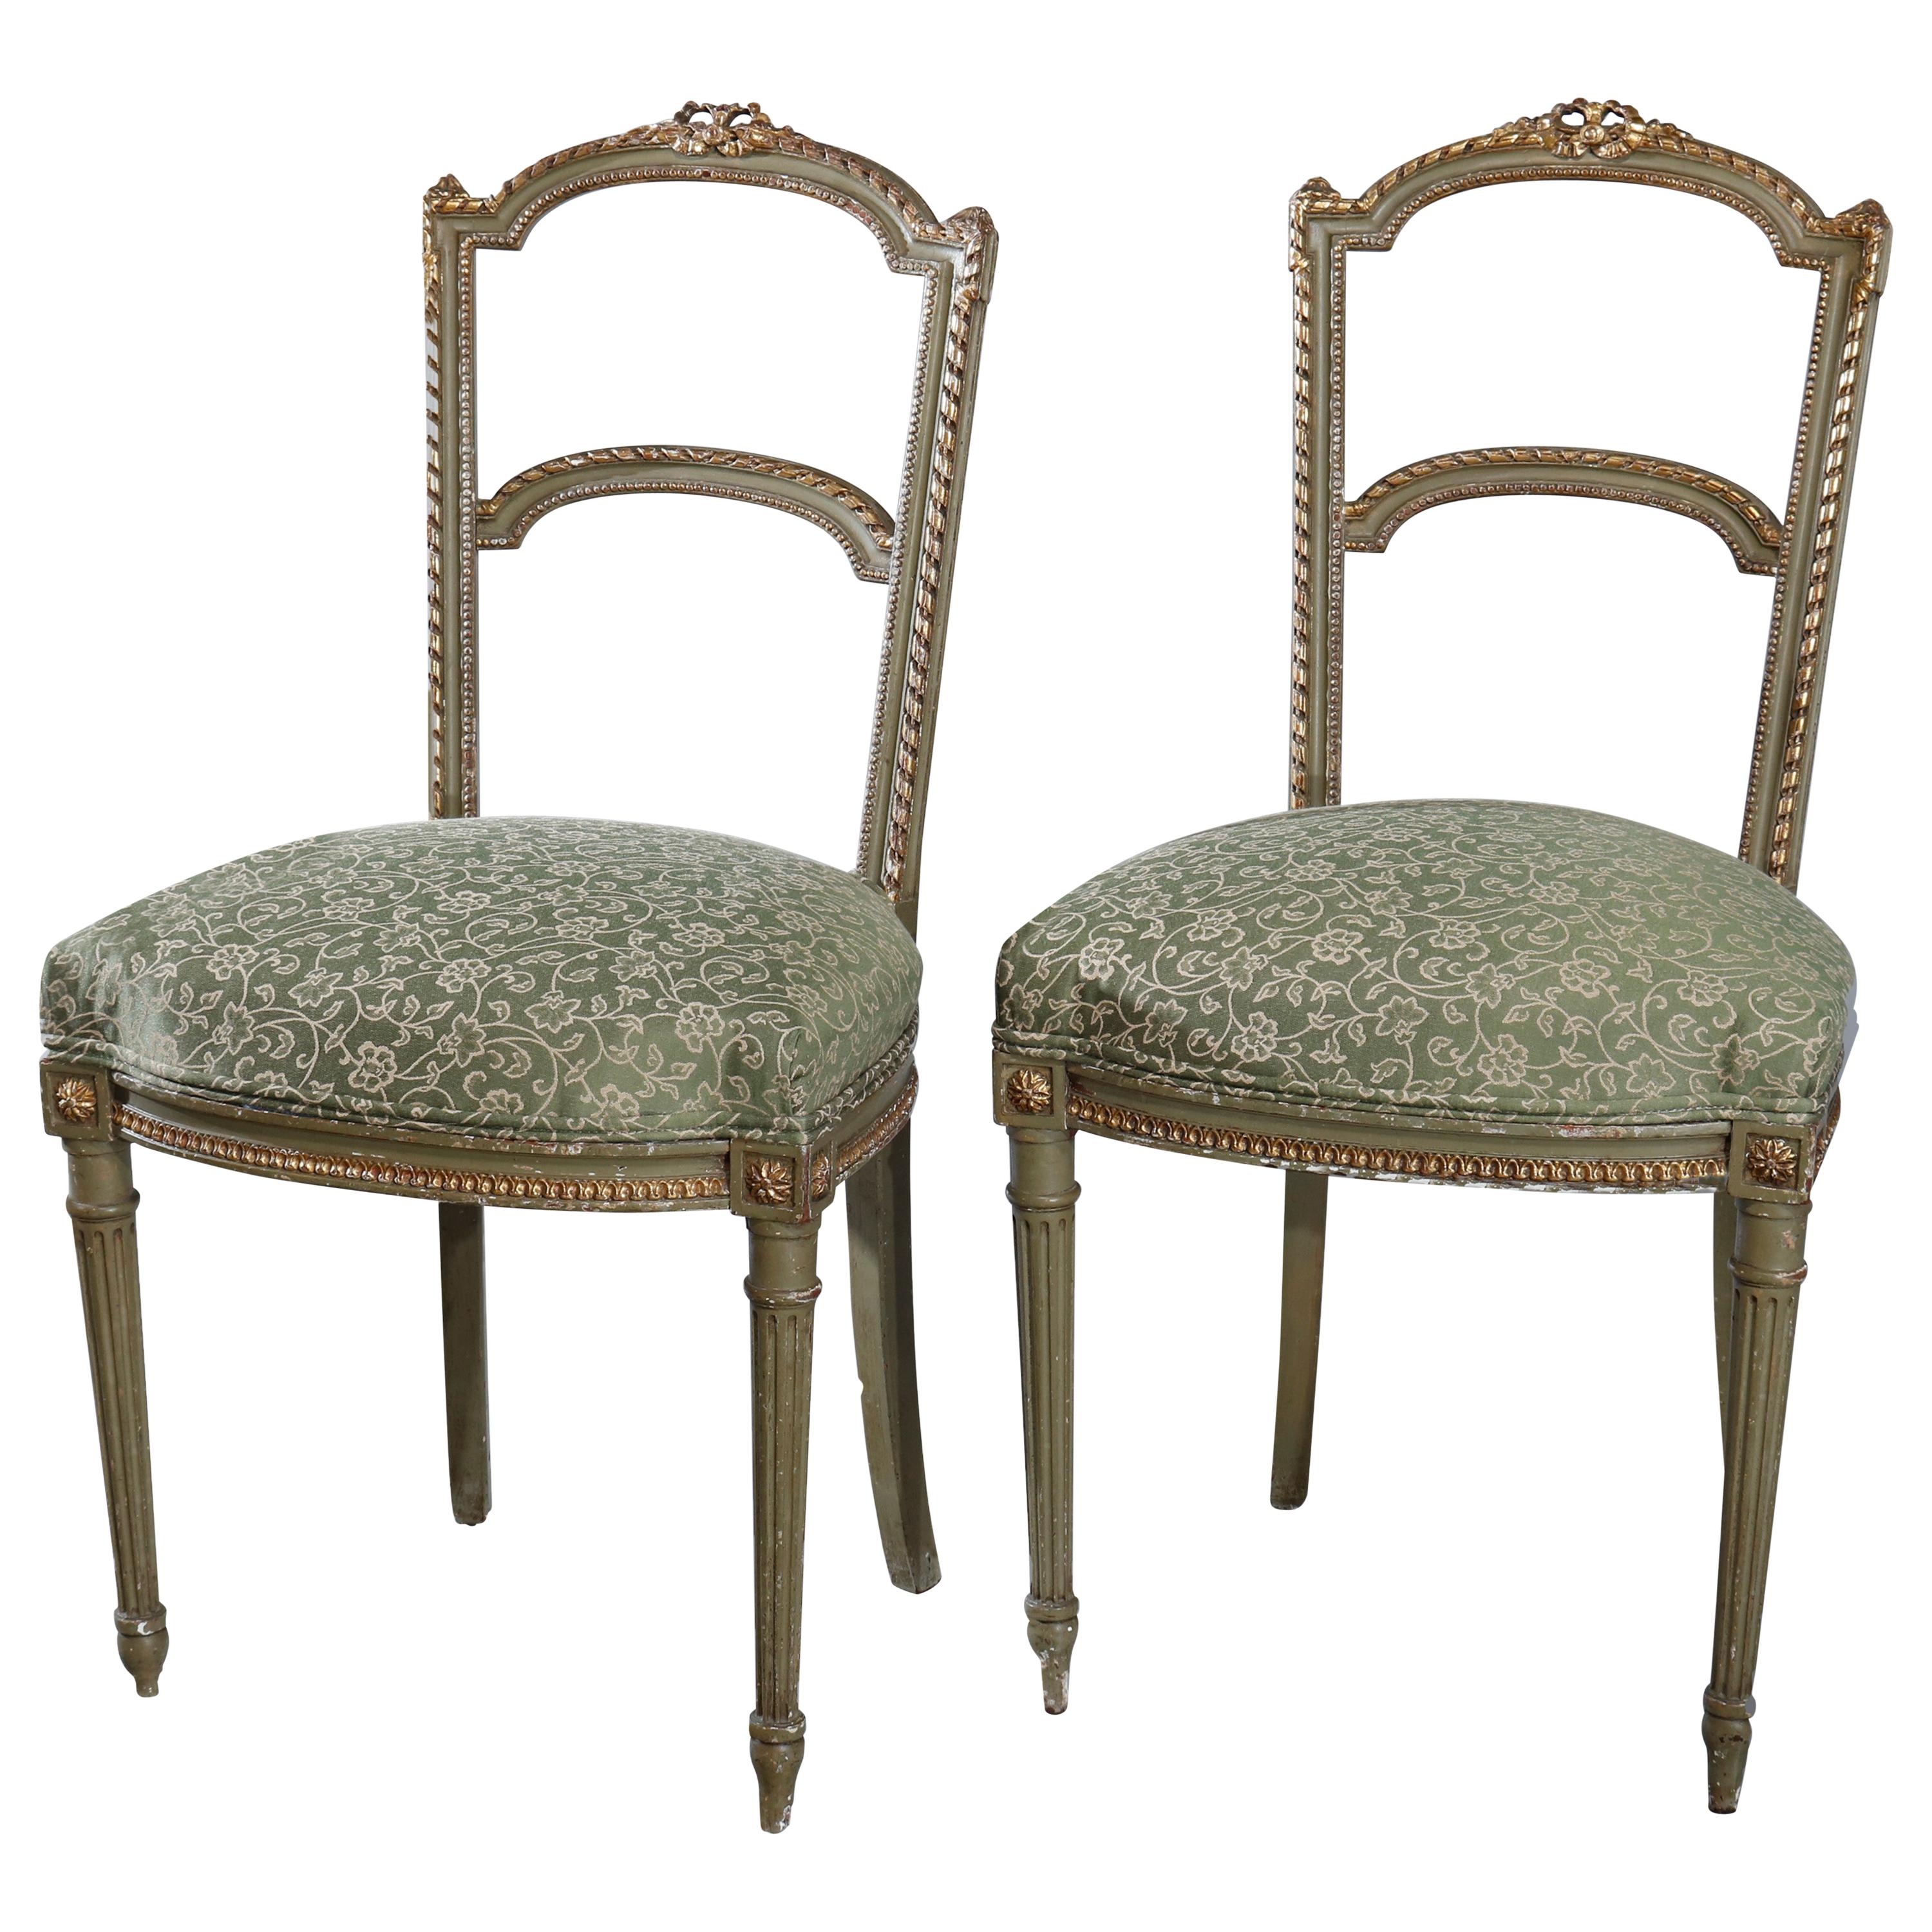 Antique Pair of French Louis XVI Style Parcel-Gilt Side Chairs, circa 1880